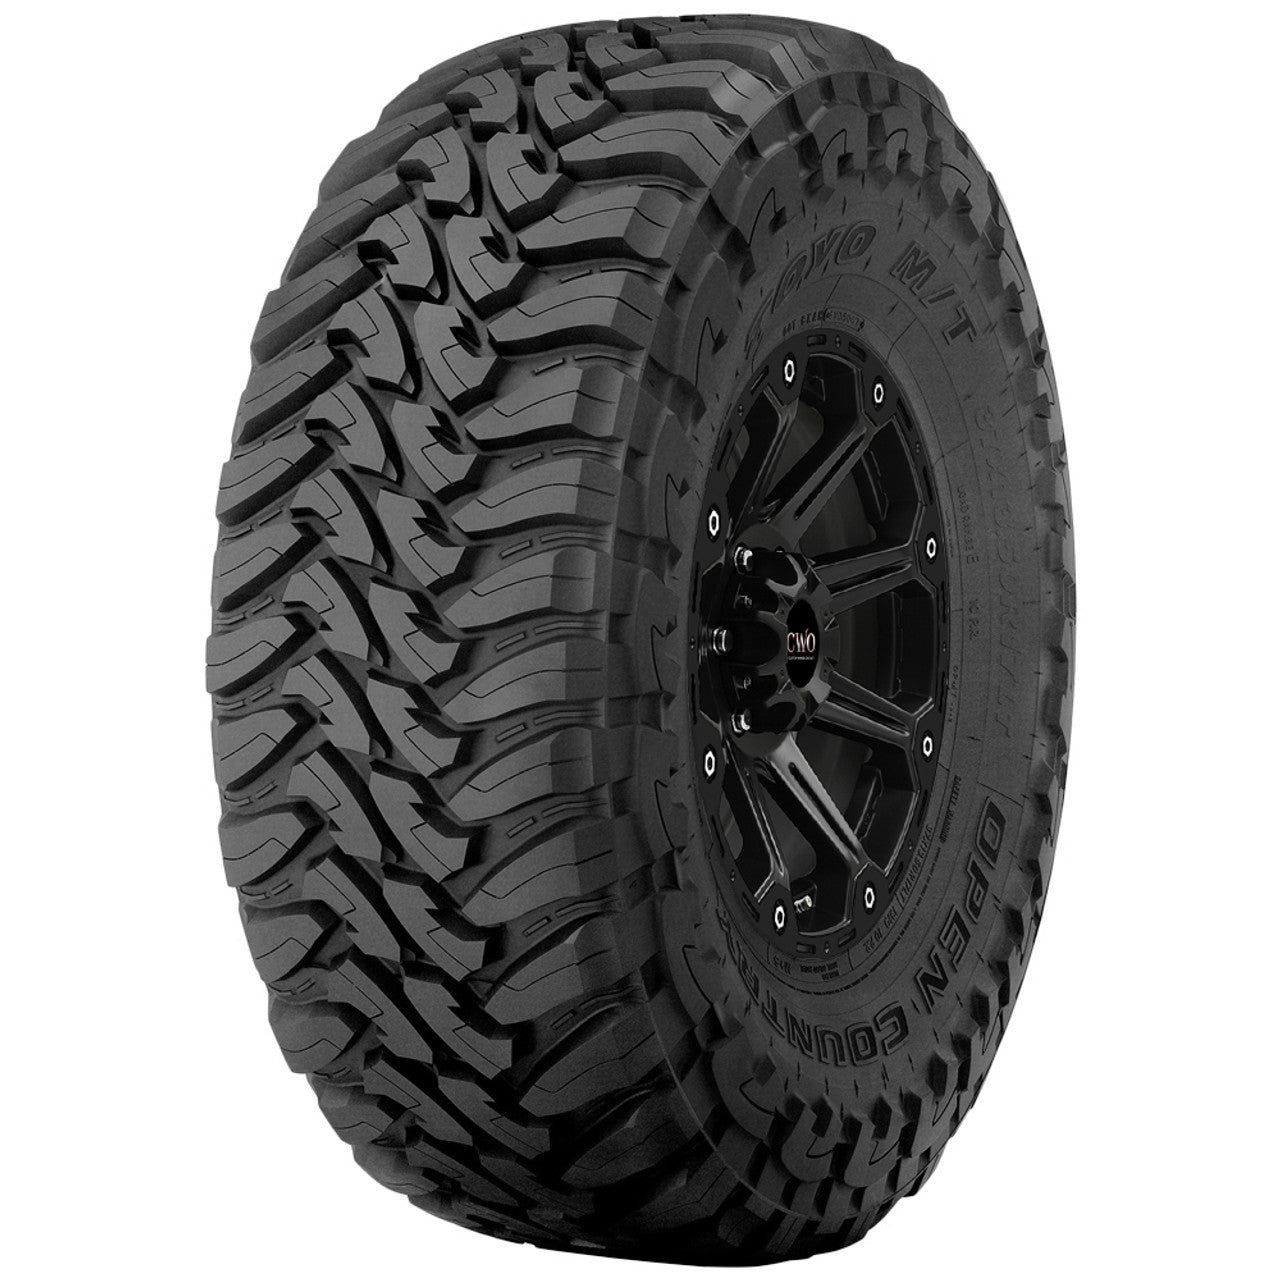 Toyo Open Country Mt - 275/55-20